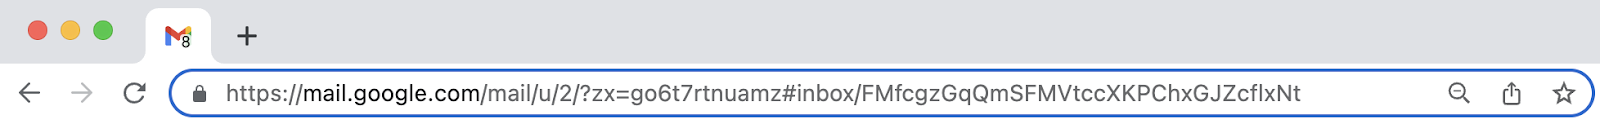 URL example from Gmail